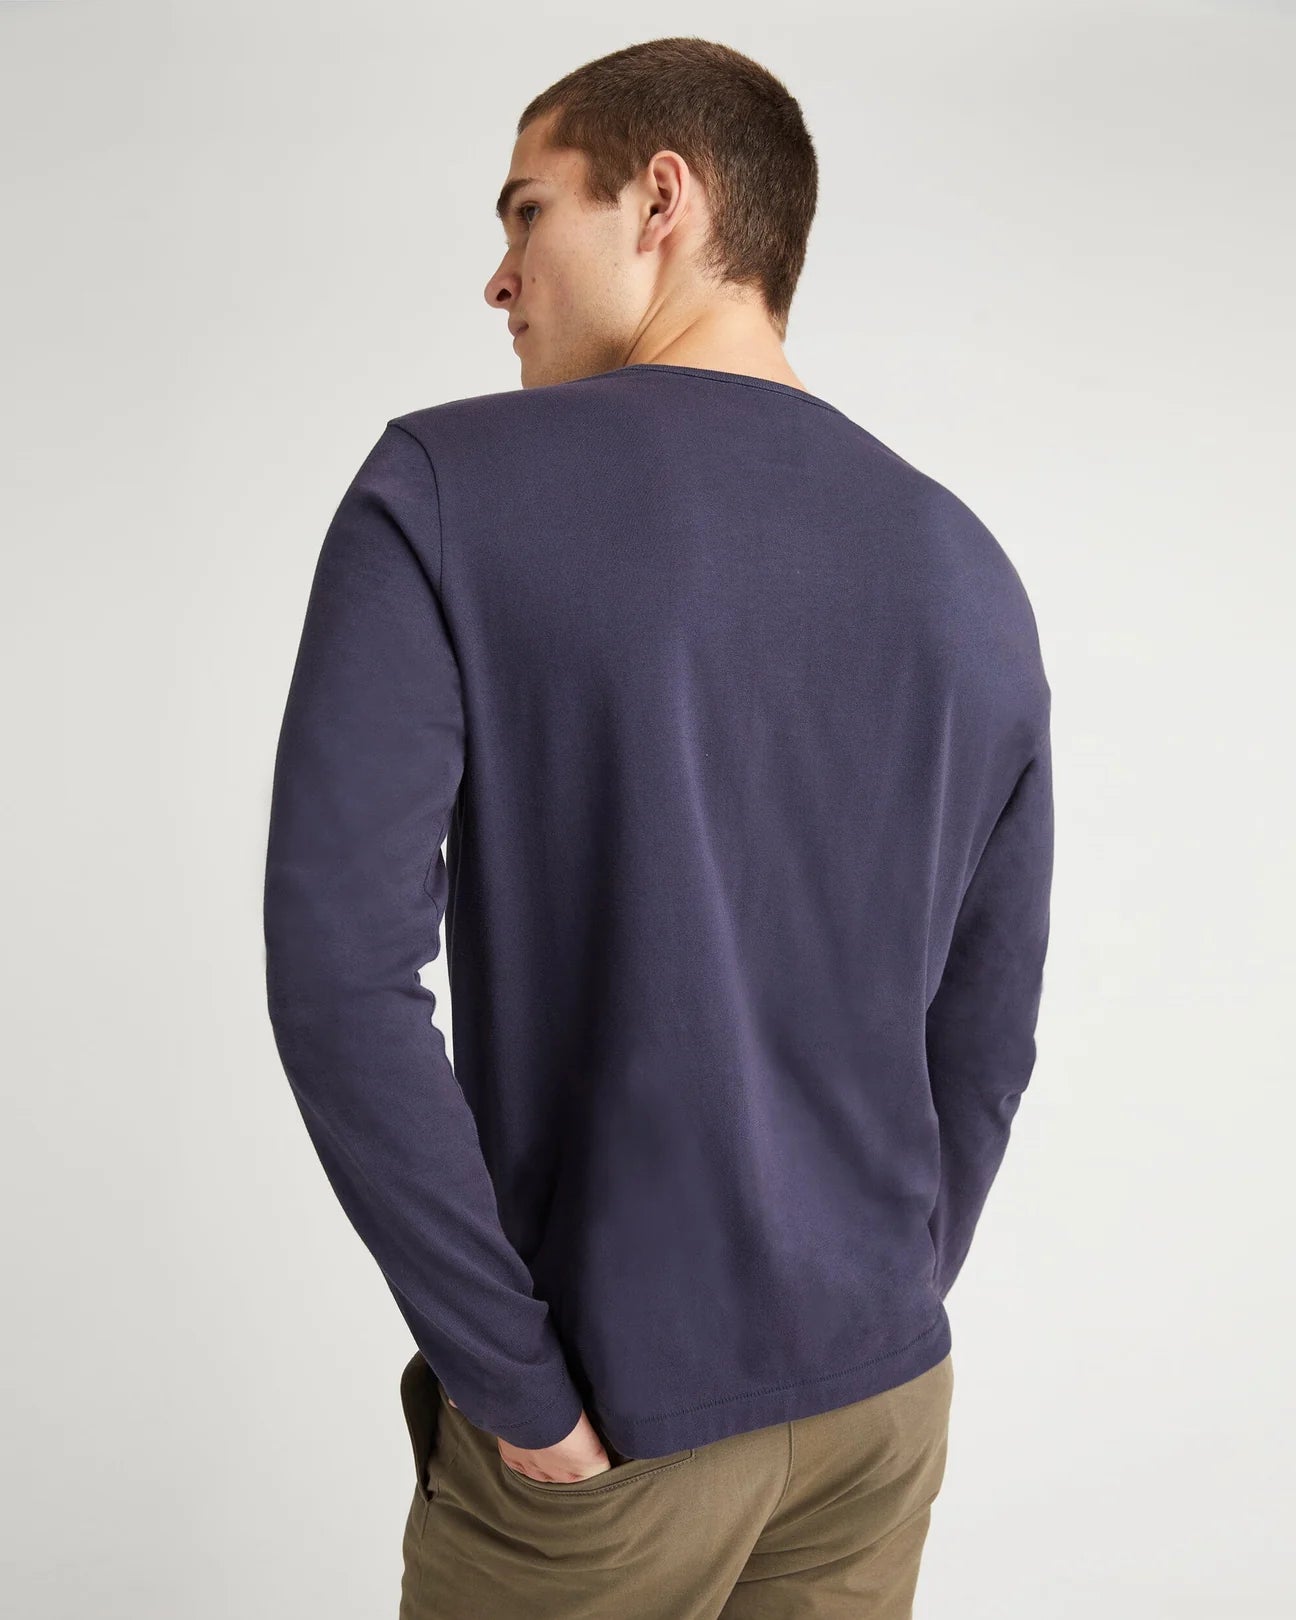 back view of model wearing a long sleeve blue color t-shirt